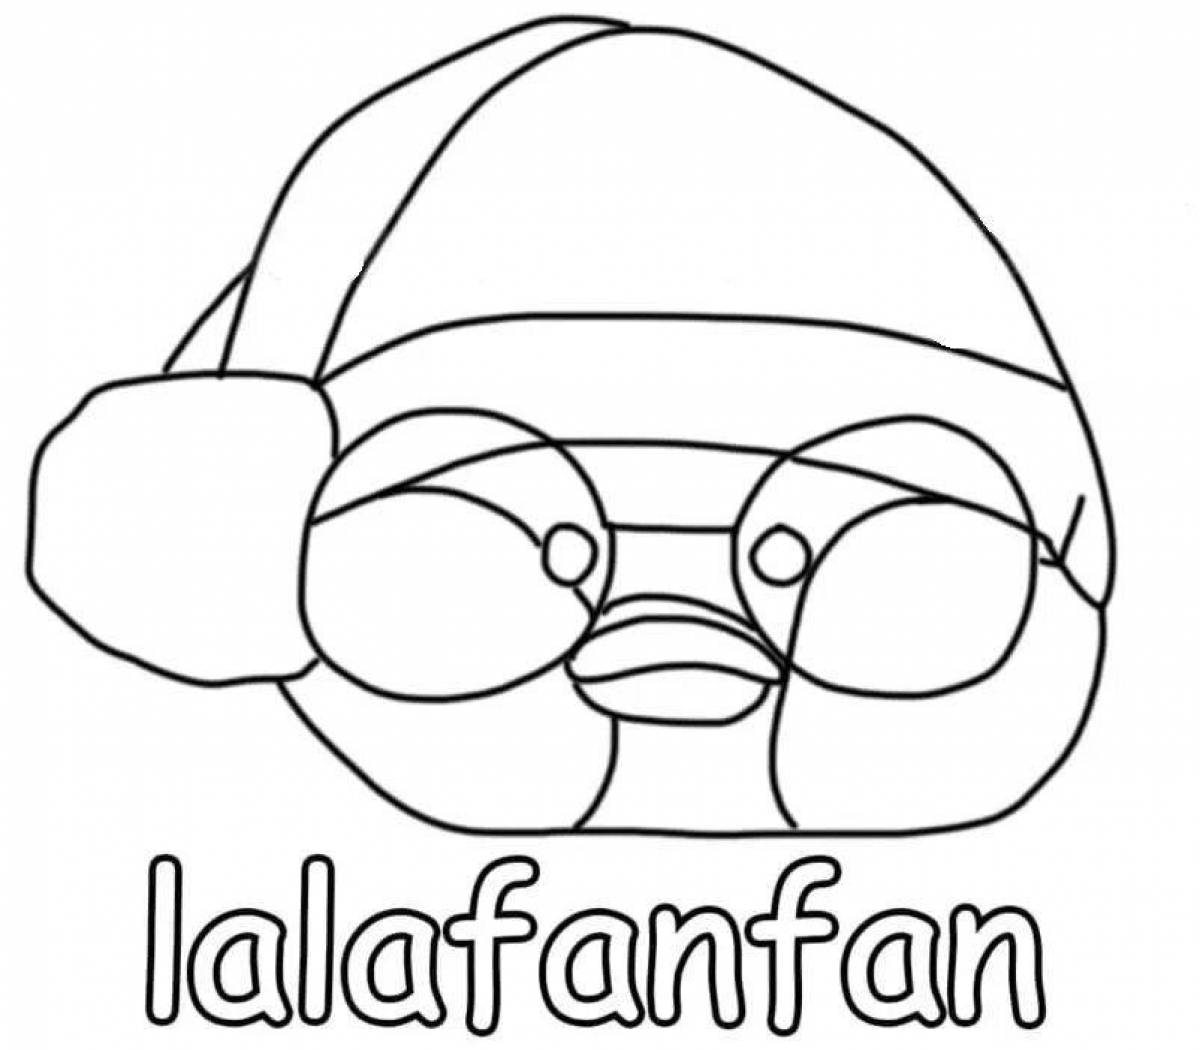 Lalafanfan glamorous duck in clothes